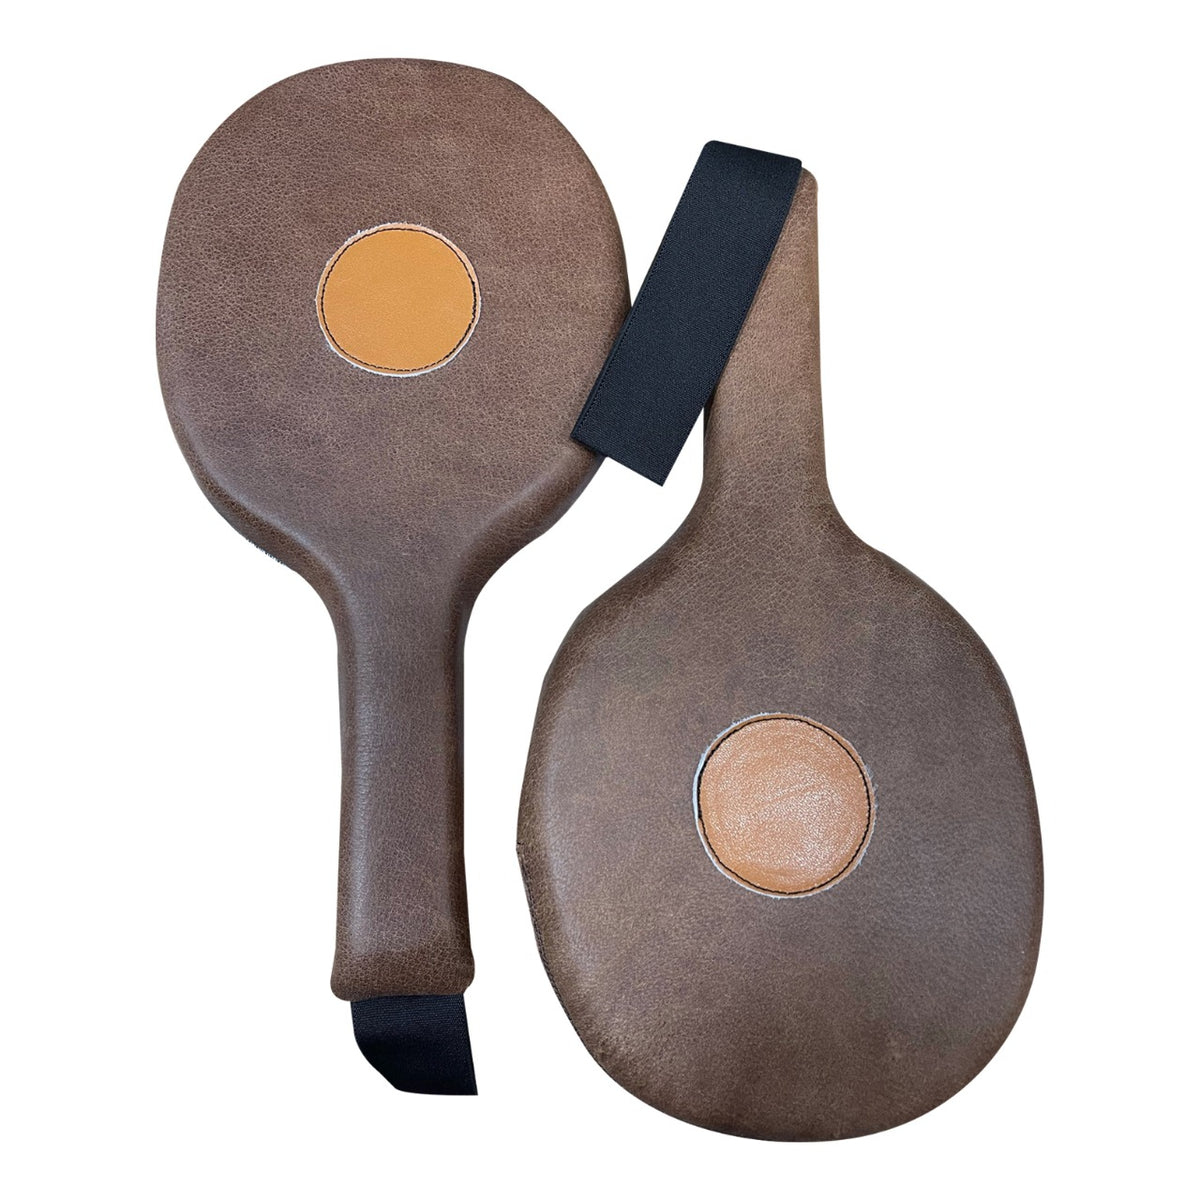 OG Brown Leather Punch Paddle